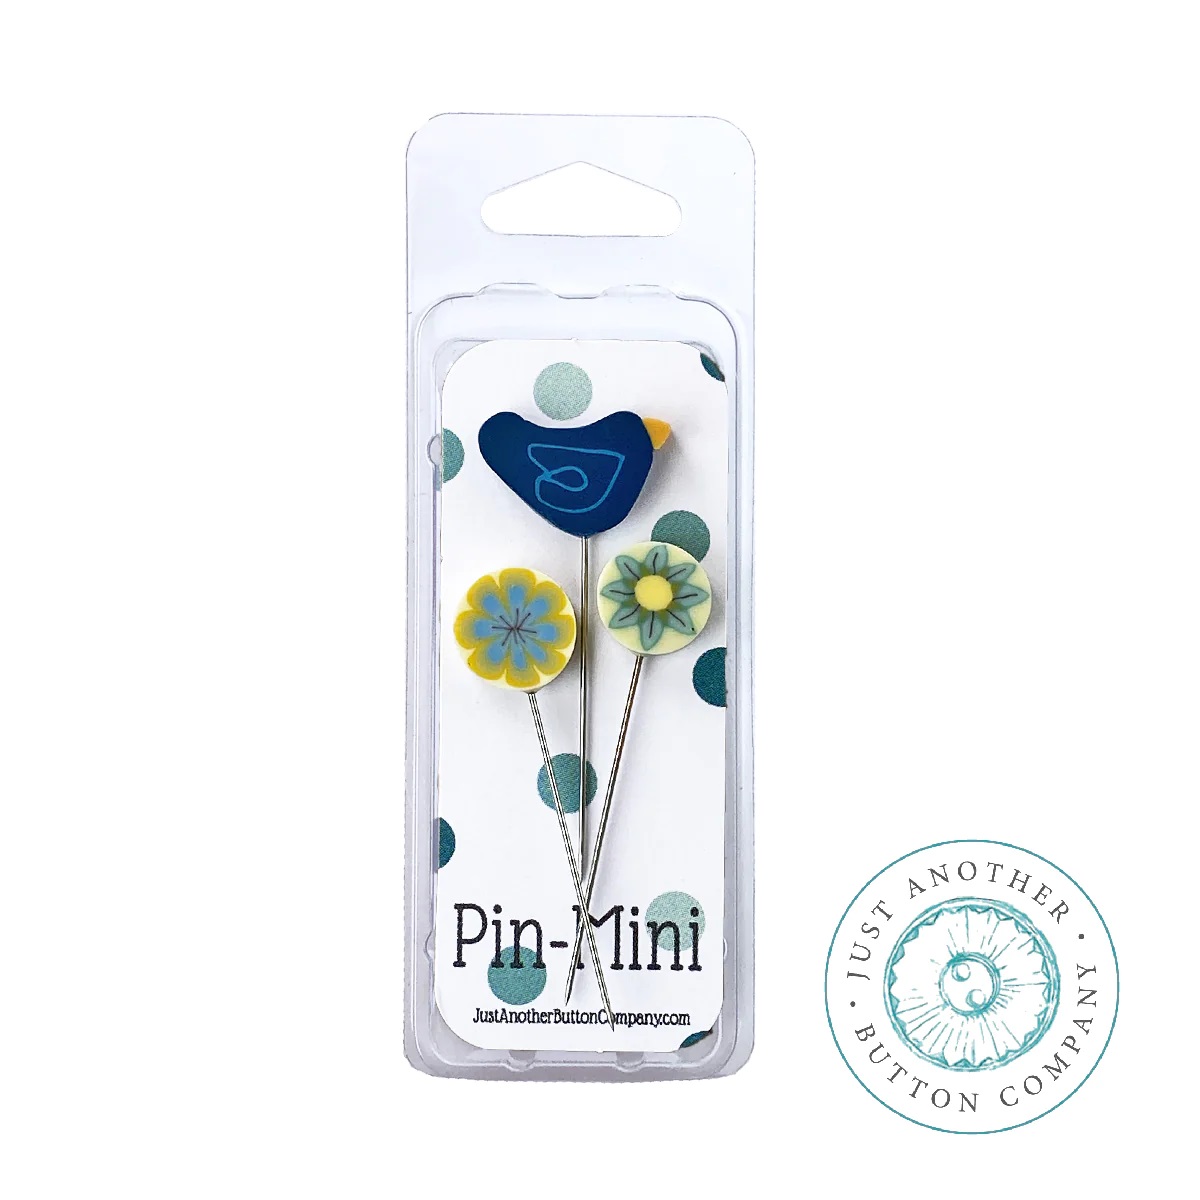 jpm518 Sing the Blues : Pin-Mini : by Just Another Button Company